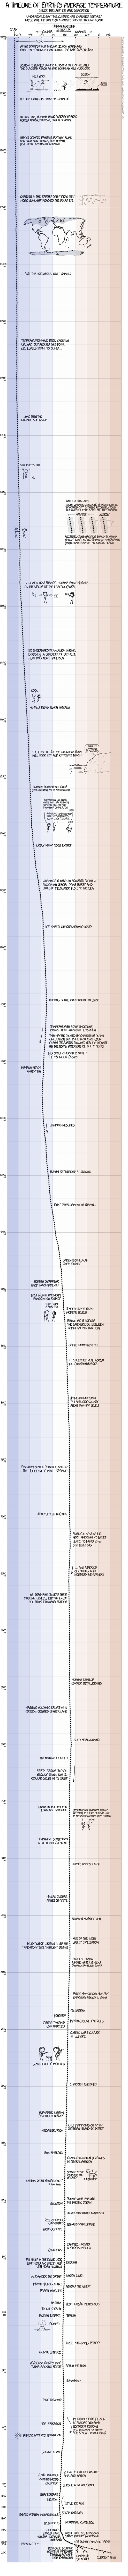 A Timeline of Earth's Average Temperature Since the Last Ice Age Glaciation. https://xkcd.com/1732/